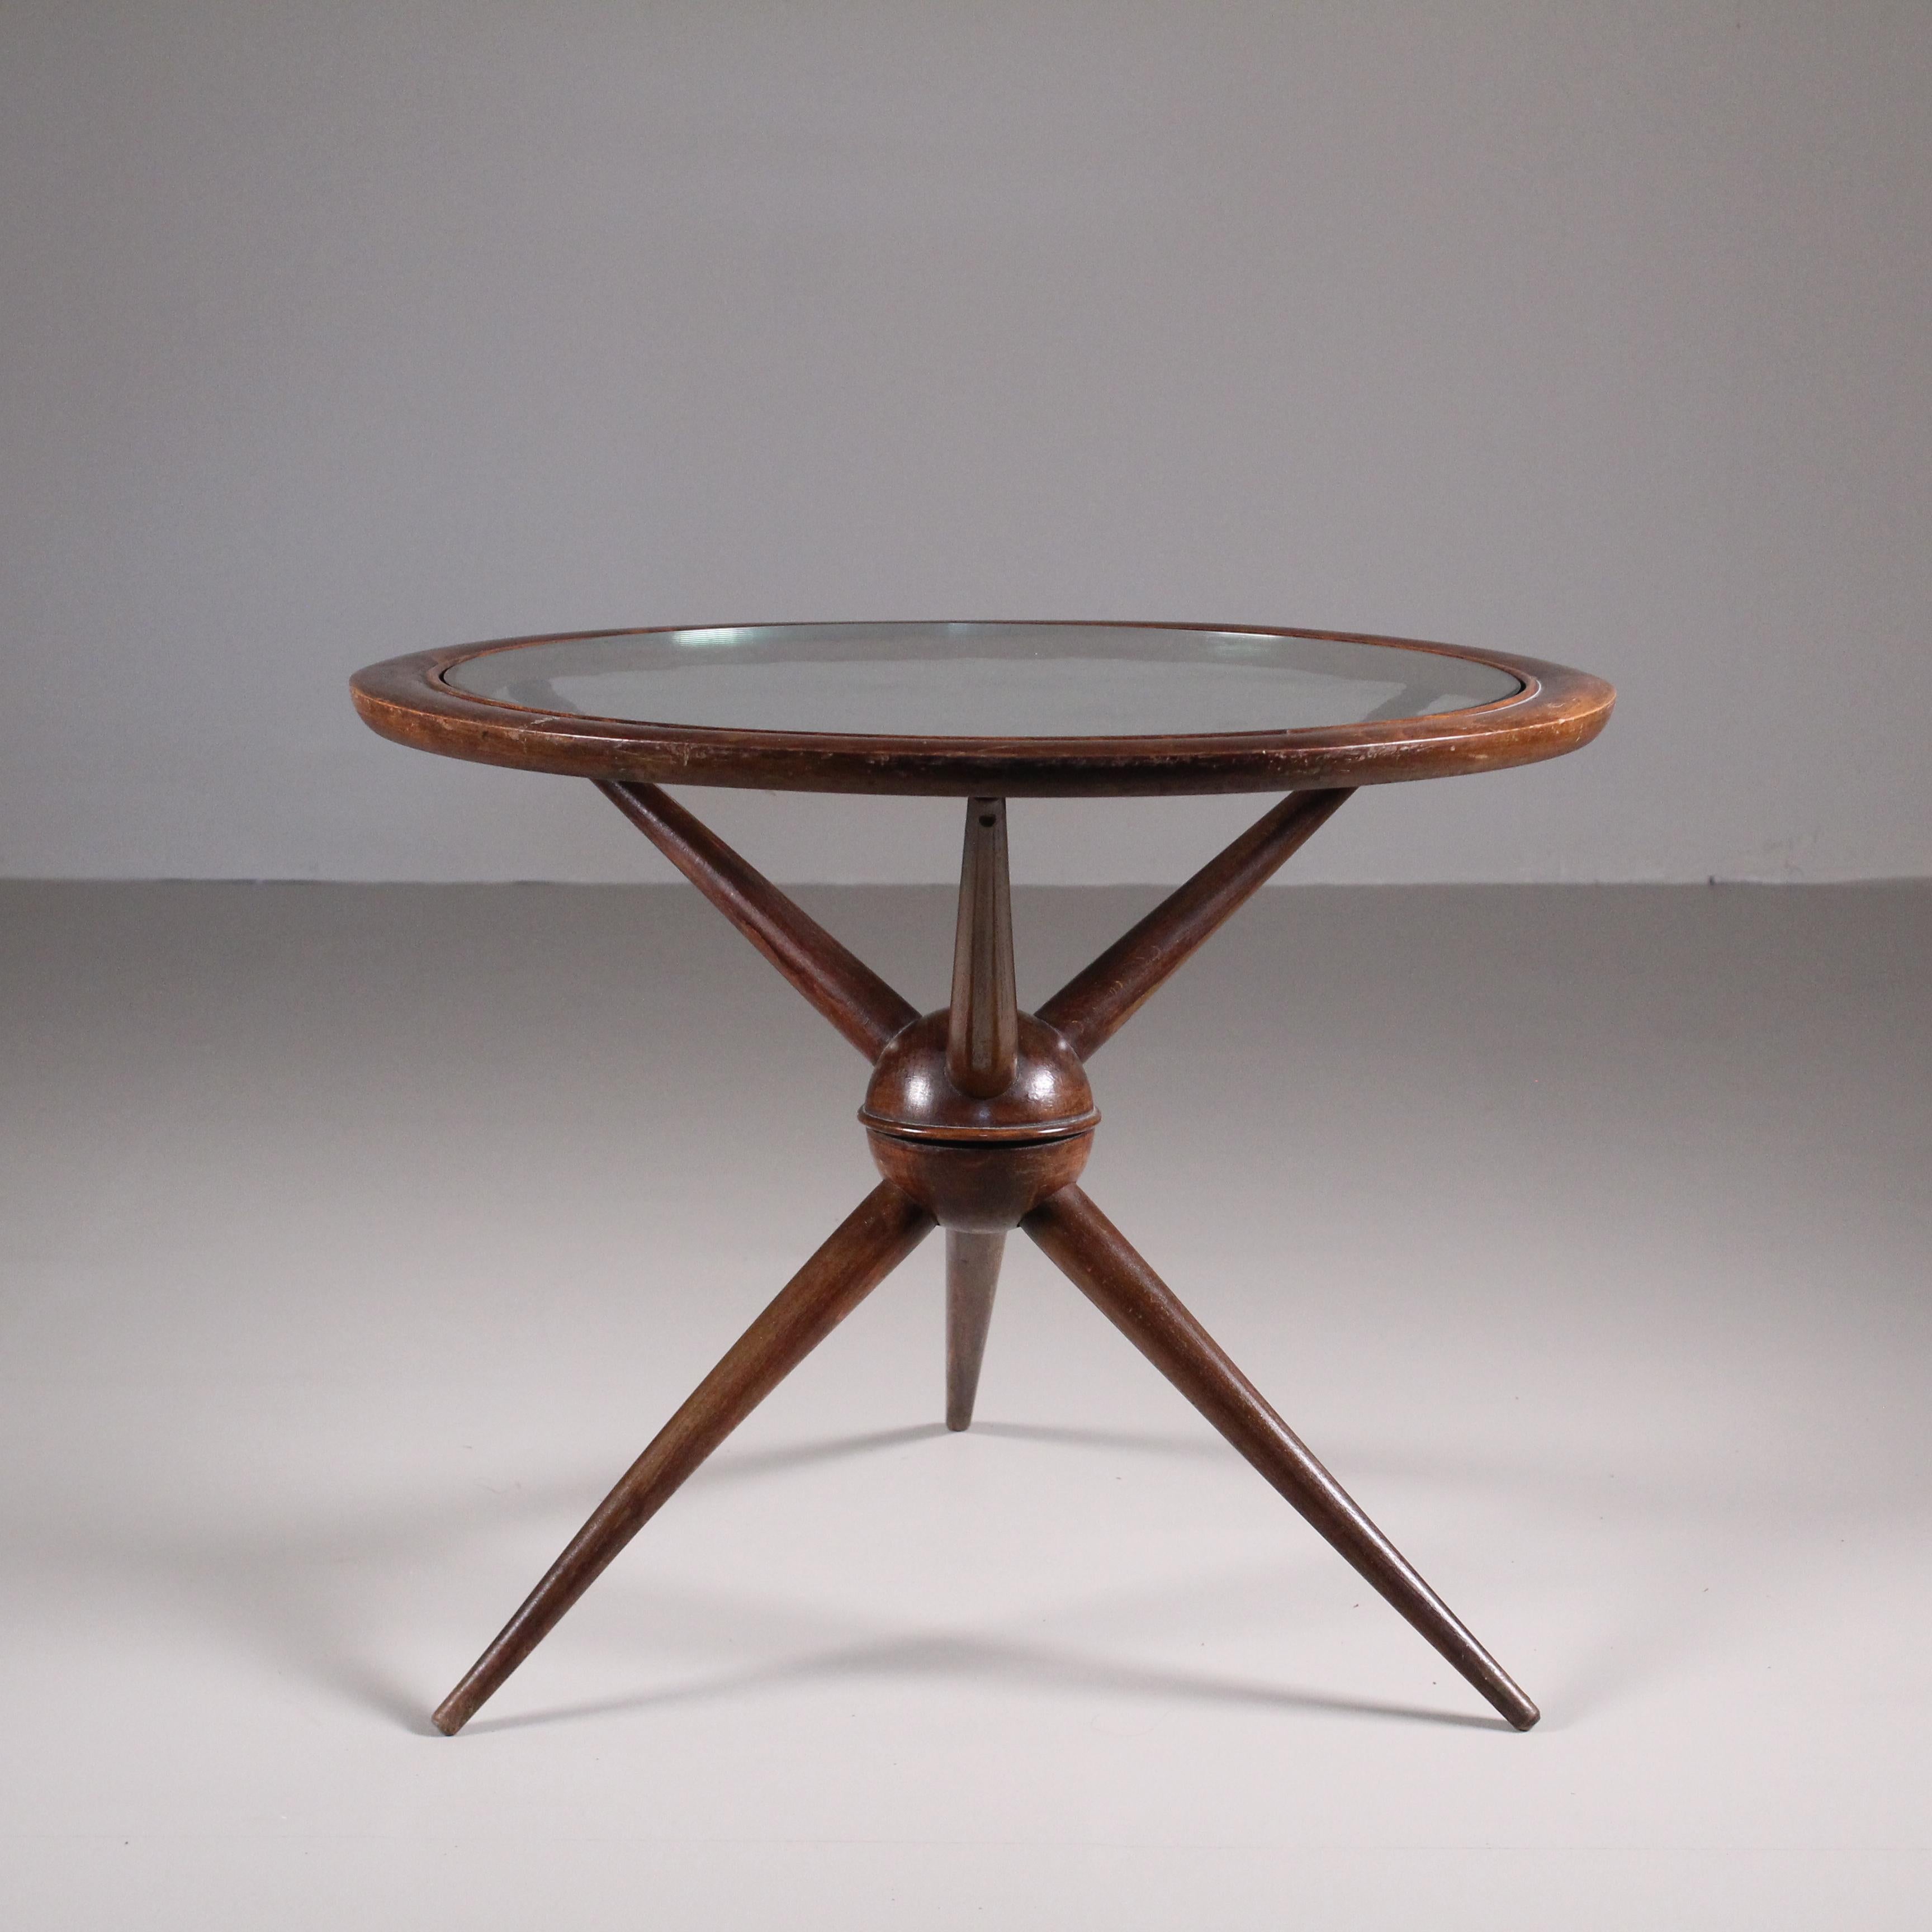 This charming Mid-Century style round coffee table is an elegant fusion of wood and glass. Its base, made of fine wood, flaunts woven legs with sinuous, slender lines typical of the iconic mid-century style. The table top is a thin, transparent